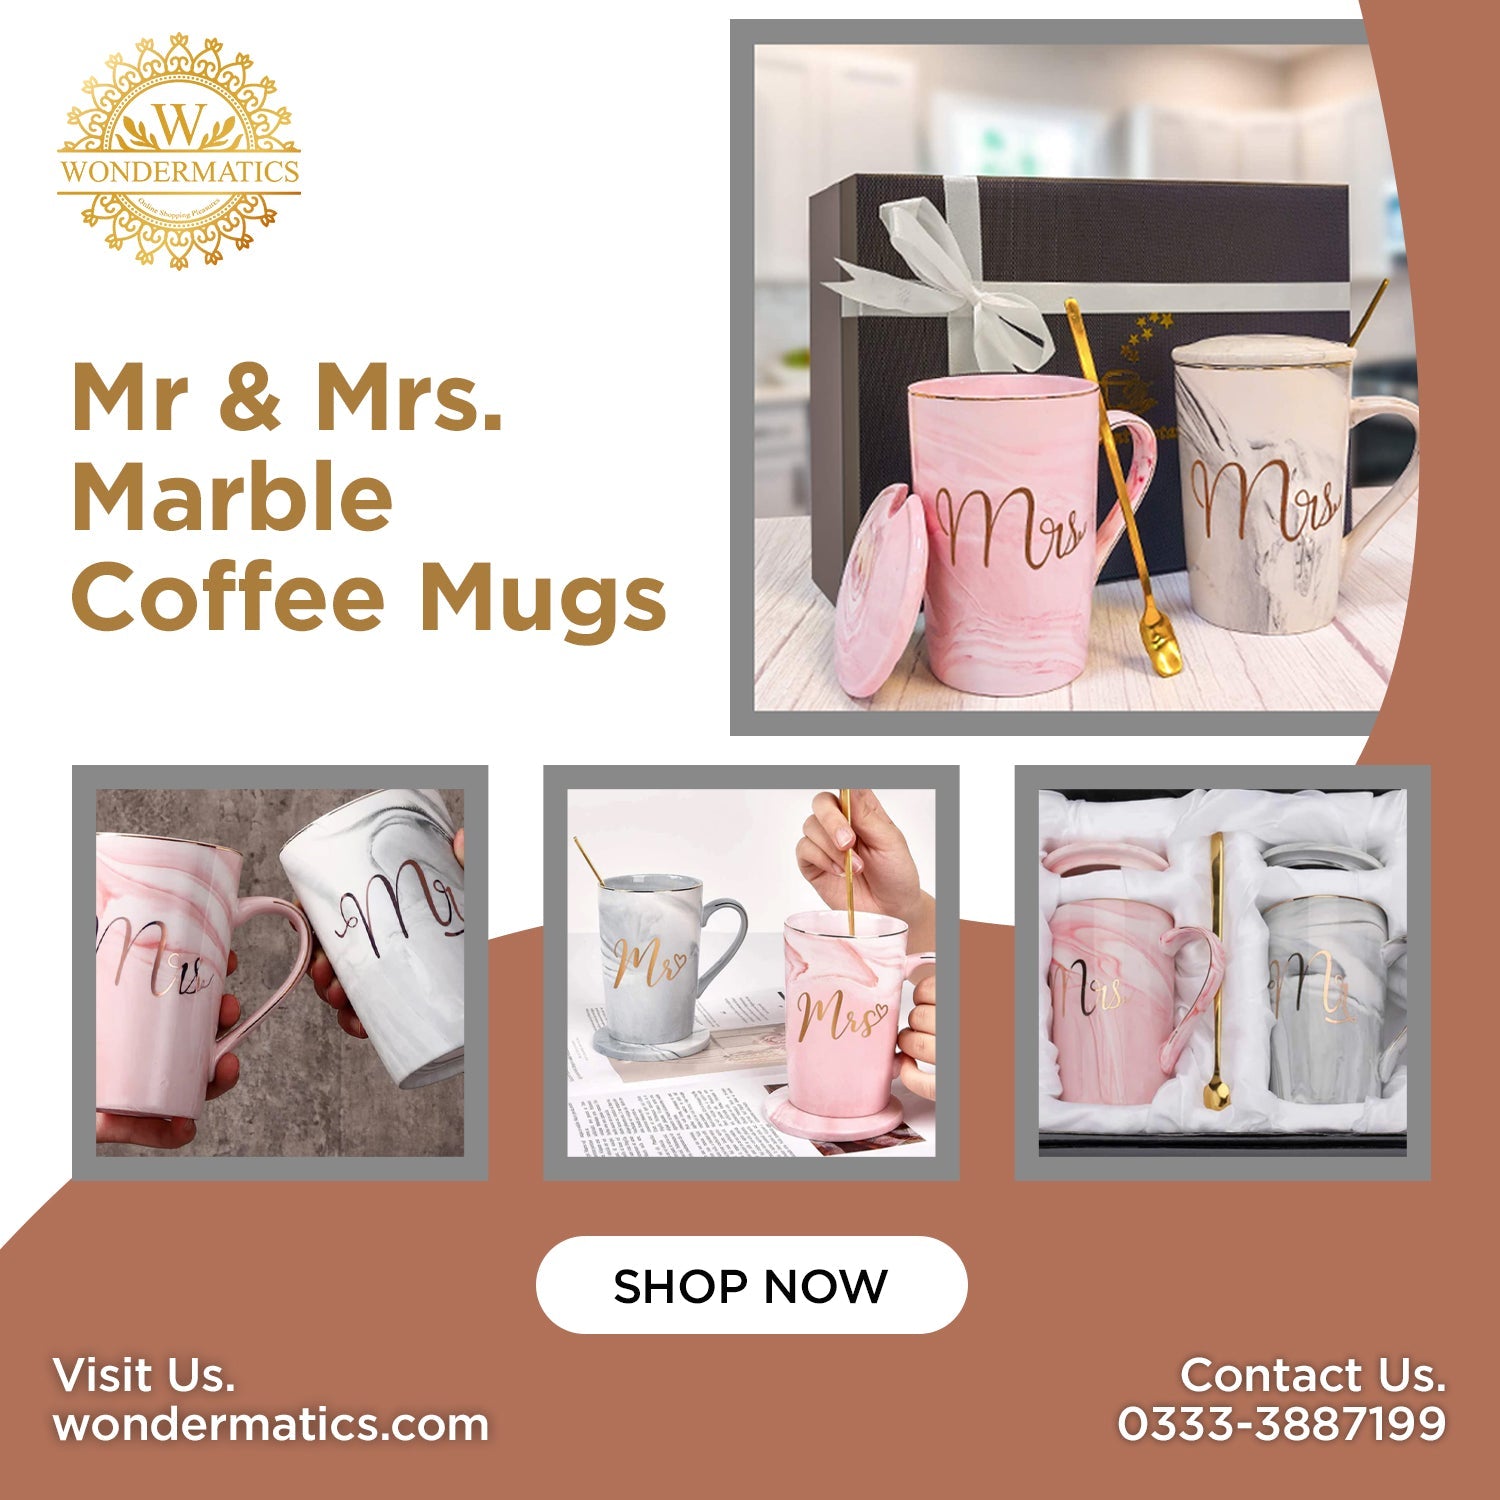 Mr and Mrs Marble Coffee Mugs - A Unique and Personalized Wedding Gift